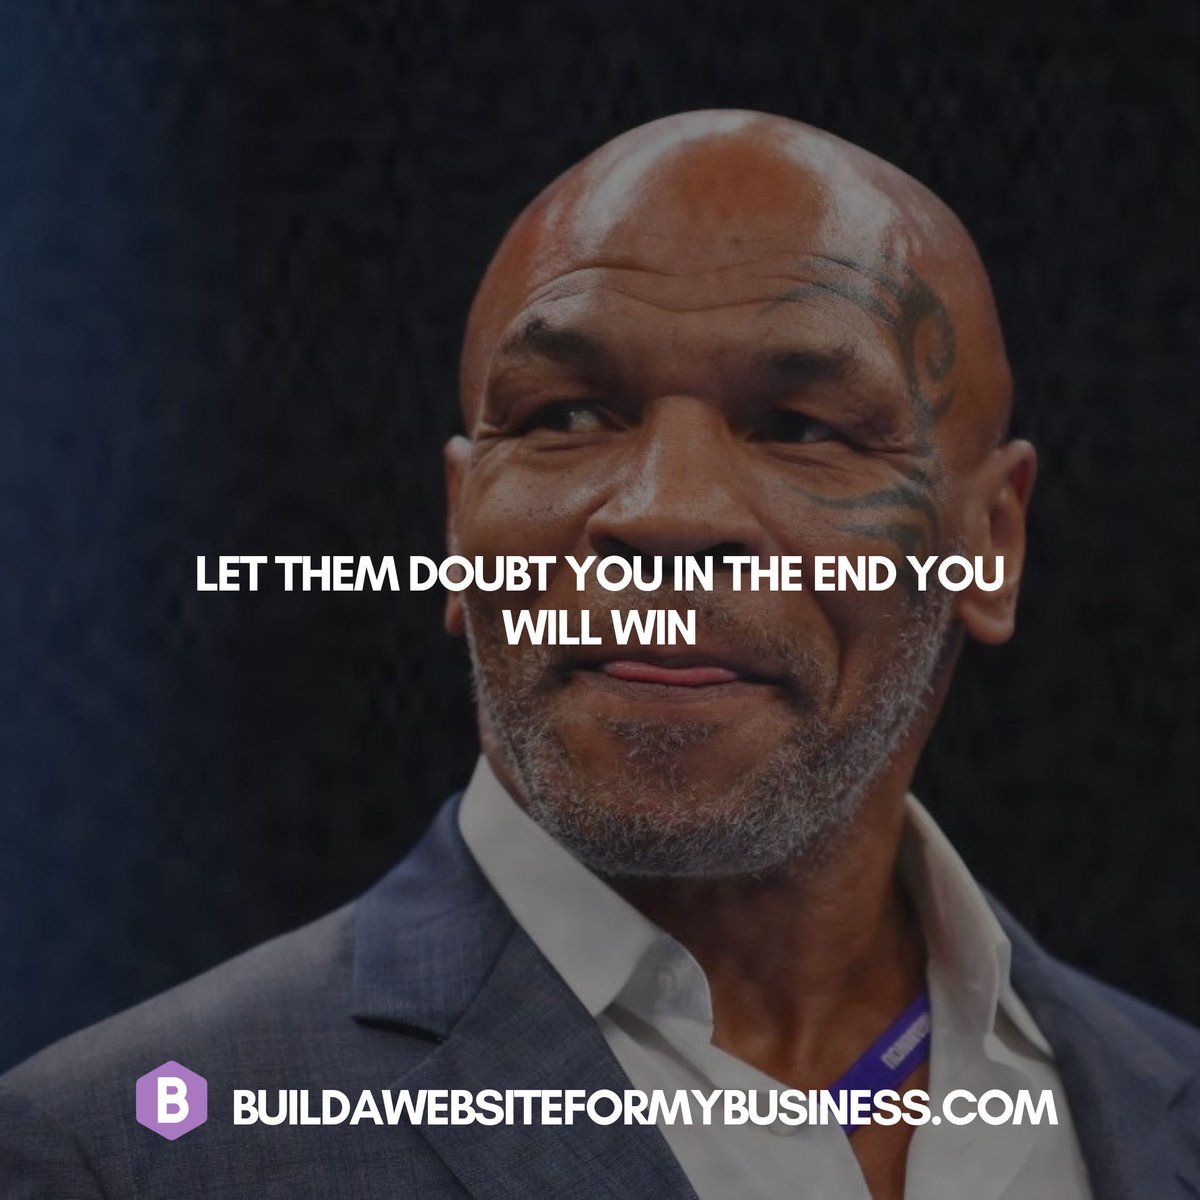 Let them doubt you in the end you will win - Let us build your website while we build your business buildawebsiteformybusiness.com 
.
.
#InspirationDaily #QuoteOfTheDay #MotivationalQuotes #InspirationalQuotes #Positivity #PositiveMindset #SelfImprovement #DreamBig #AchieveGreatness